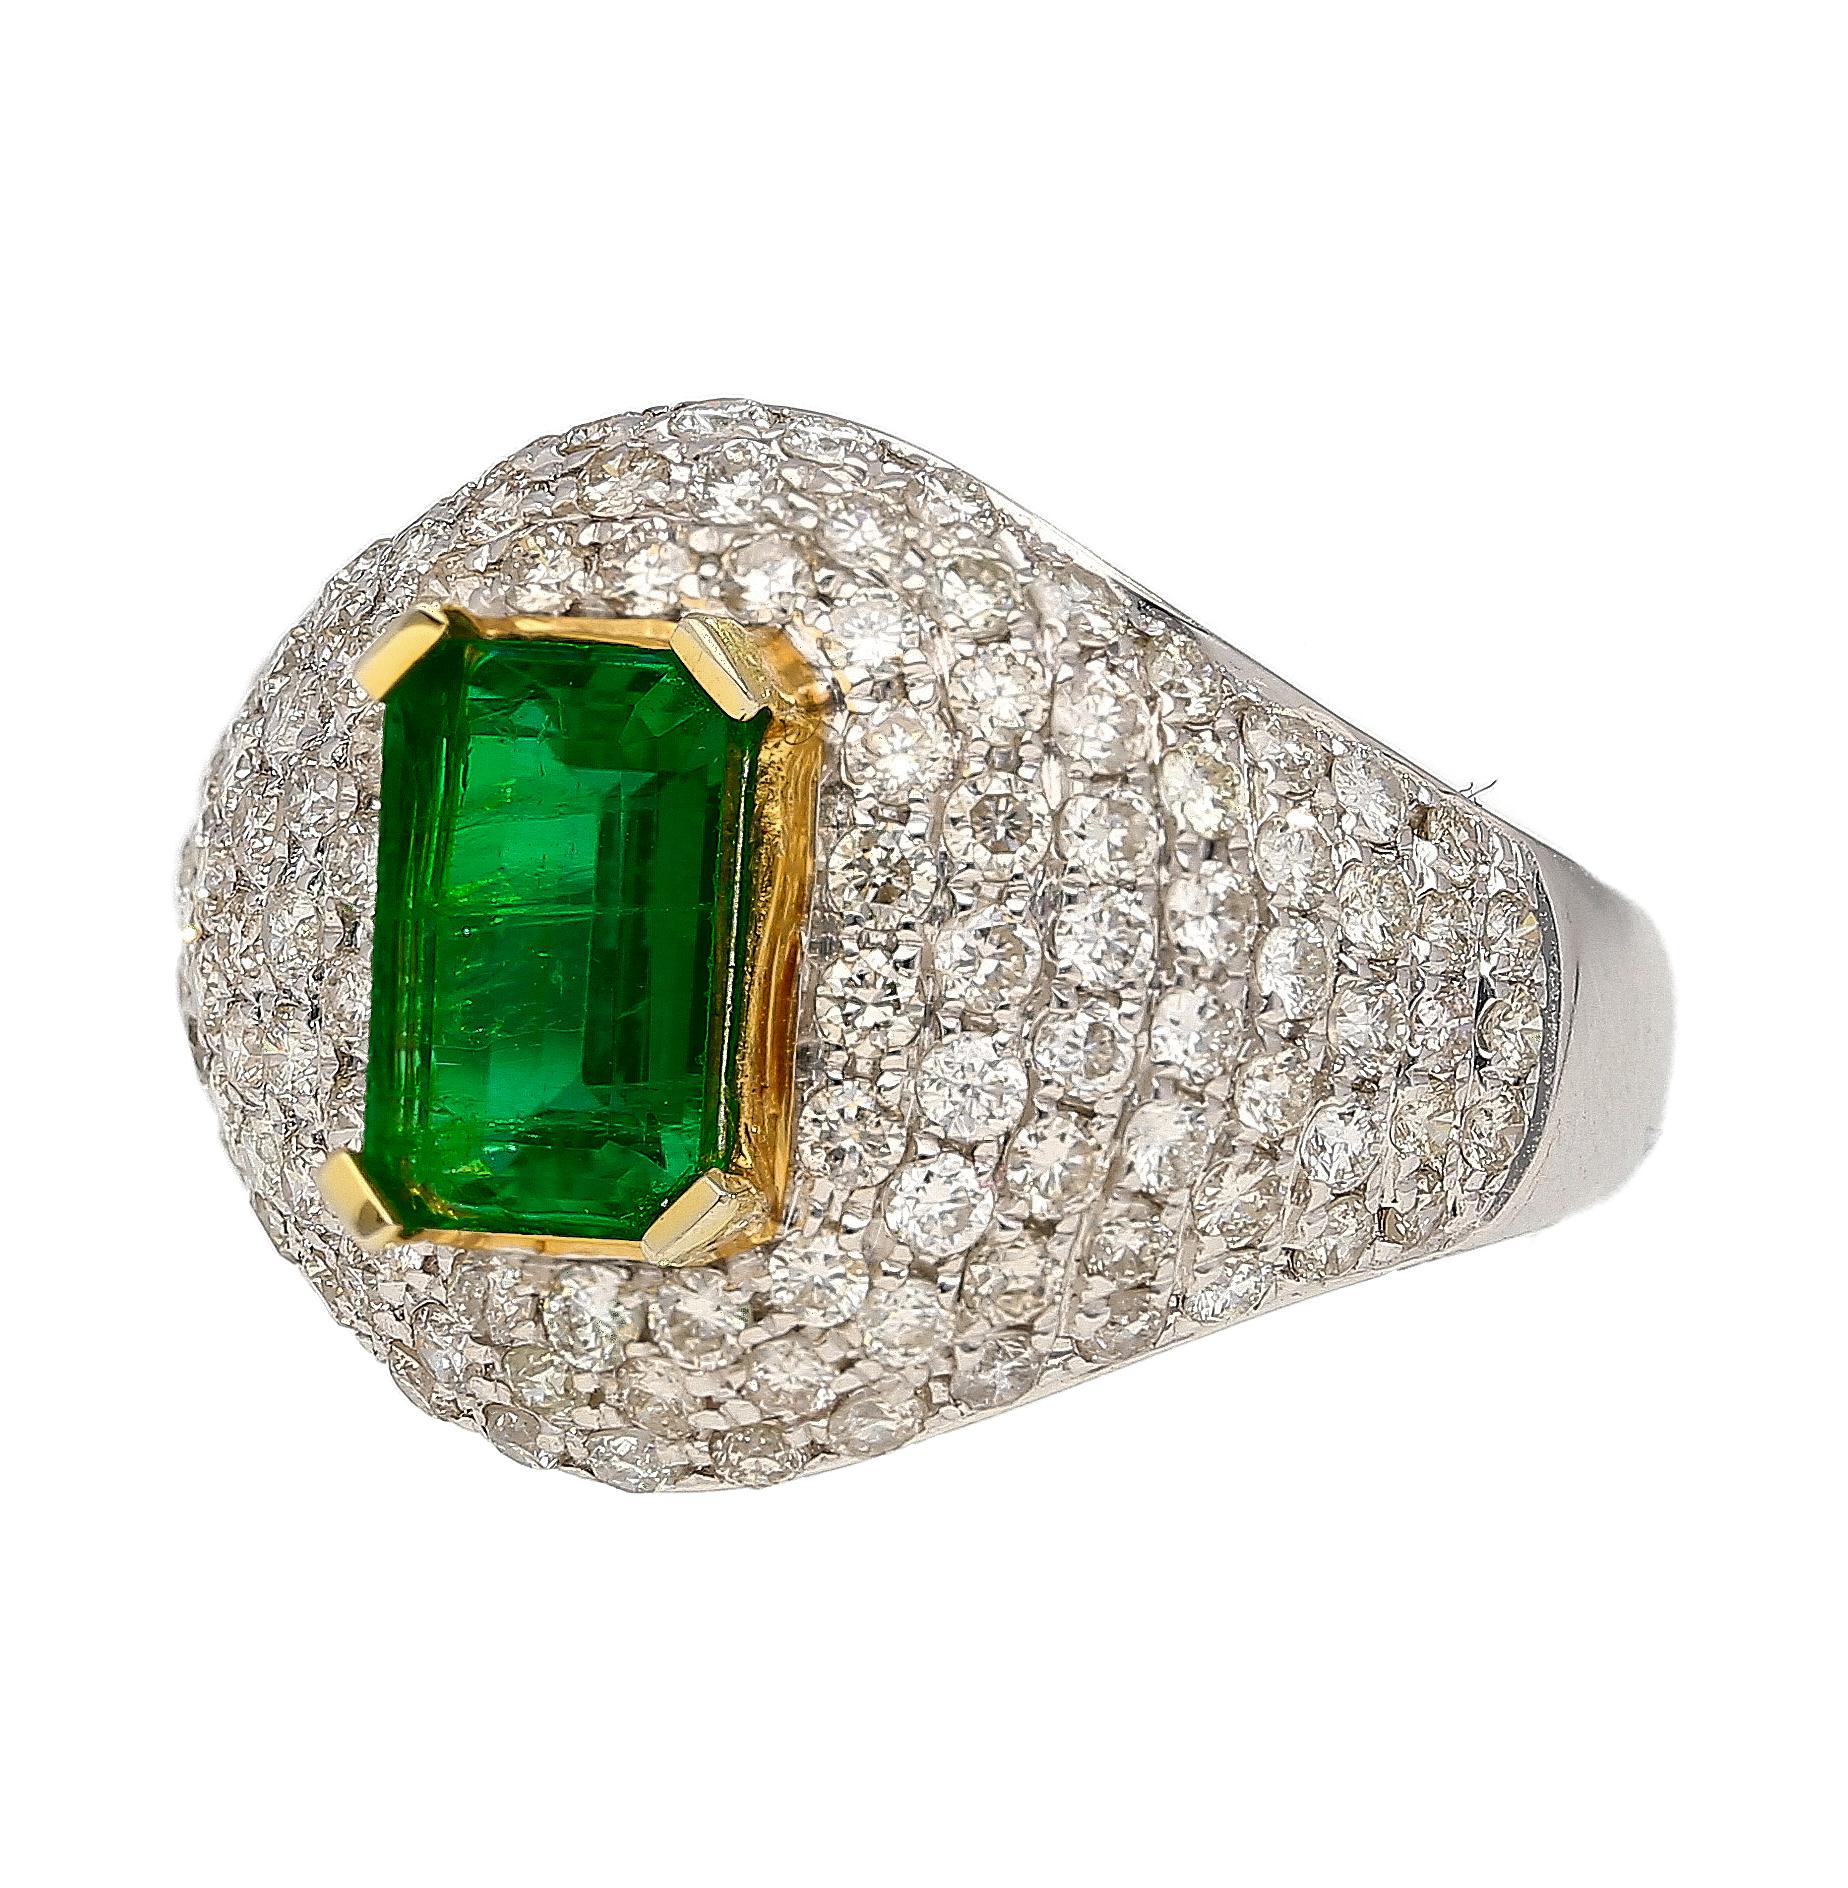 This ring is a 1.25 carat moderate oil Zambian emerald, adorned with 118 round cut diamonds that total 1.37 CTTW. The emerald is prong set in 18k yellow gold while the rest of the ring is crafted in 18k white gold. The diamonds are pave set creating